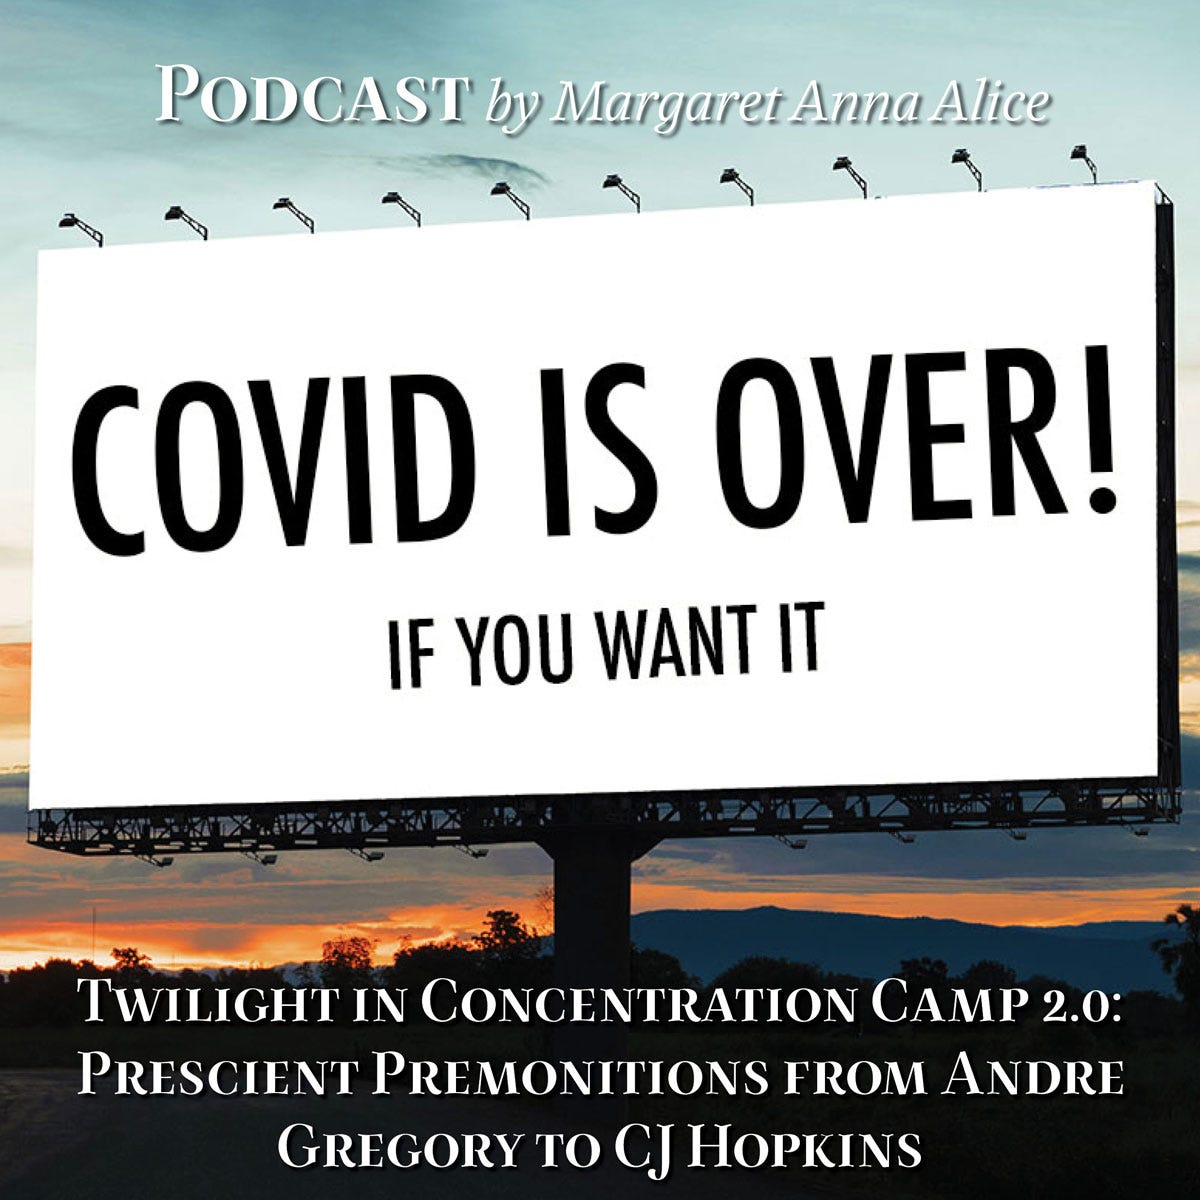 COVID IS OVER! ... If You Want It: Twilight in Concentration Camp 2.0: Prescient Premonitions from Andre Gregory to CJ Hopkins